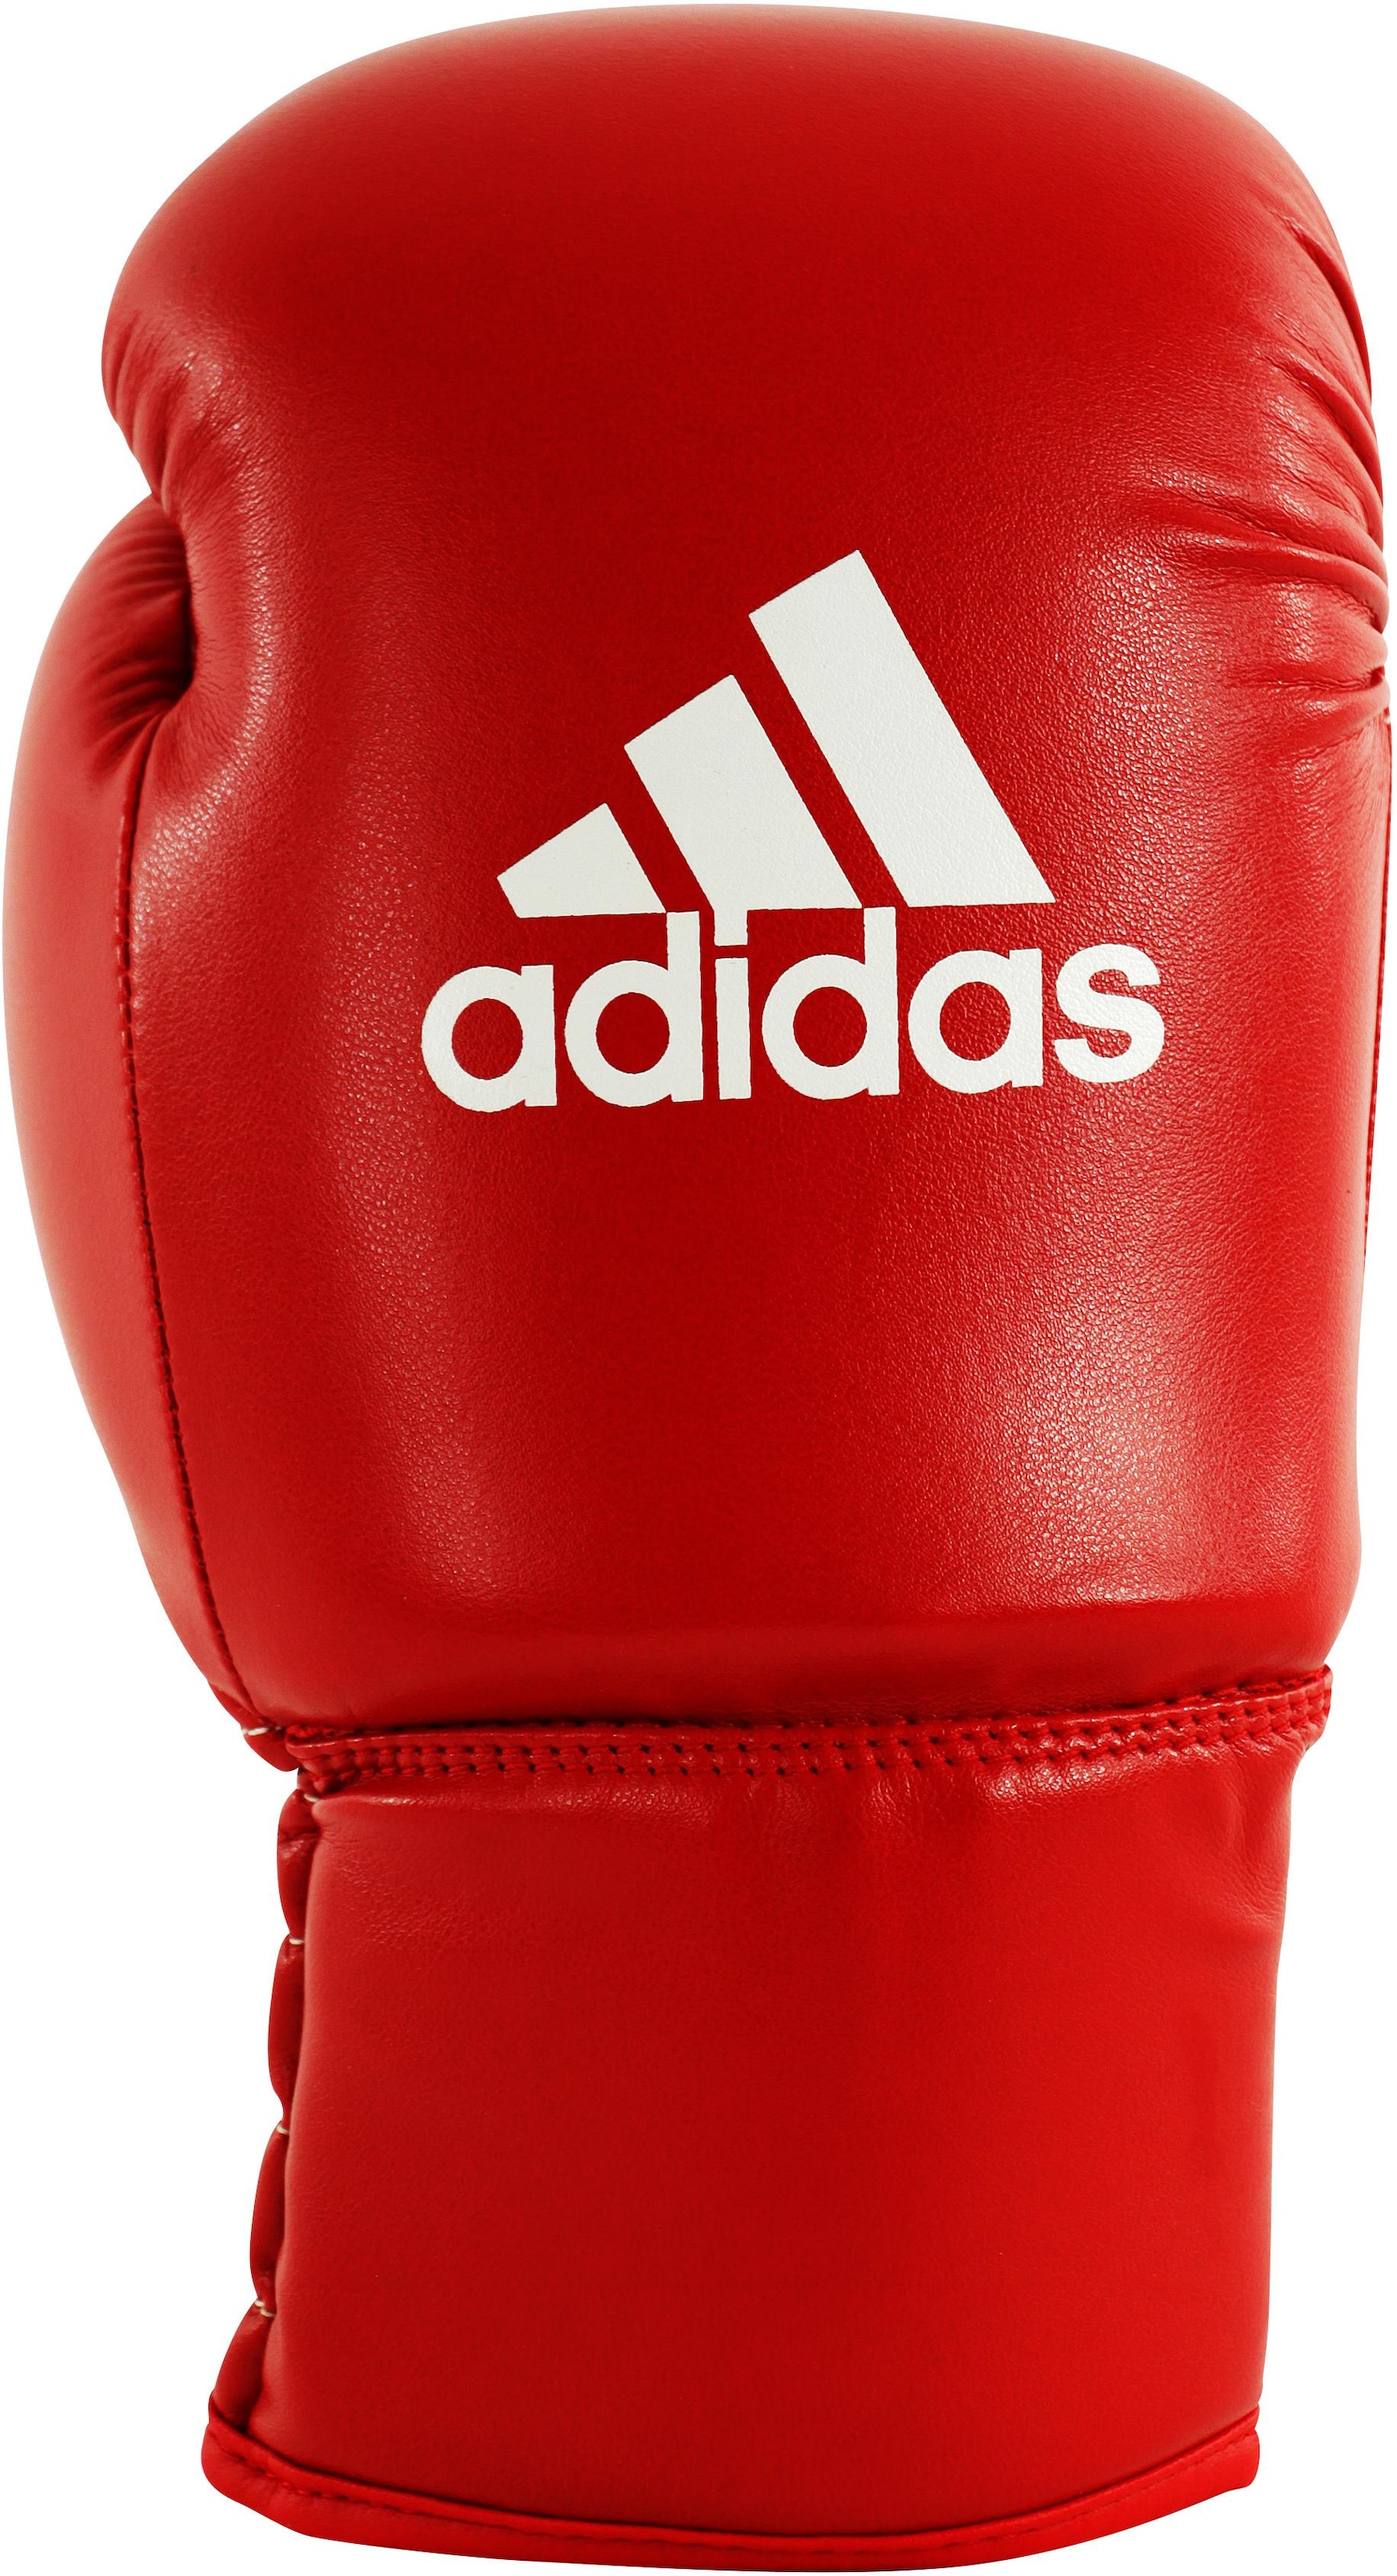 adidas Performance online OTTO Boxhandschuhe bei »ROOKIE«